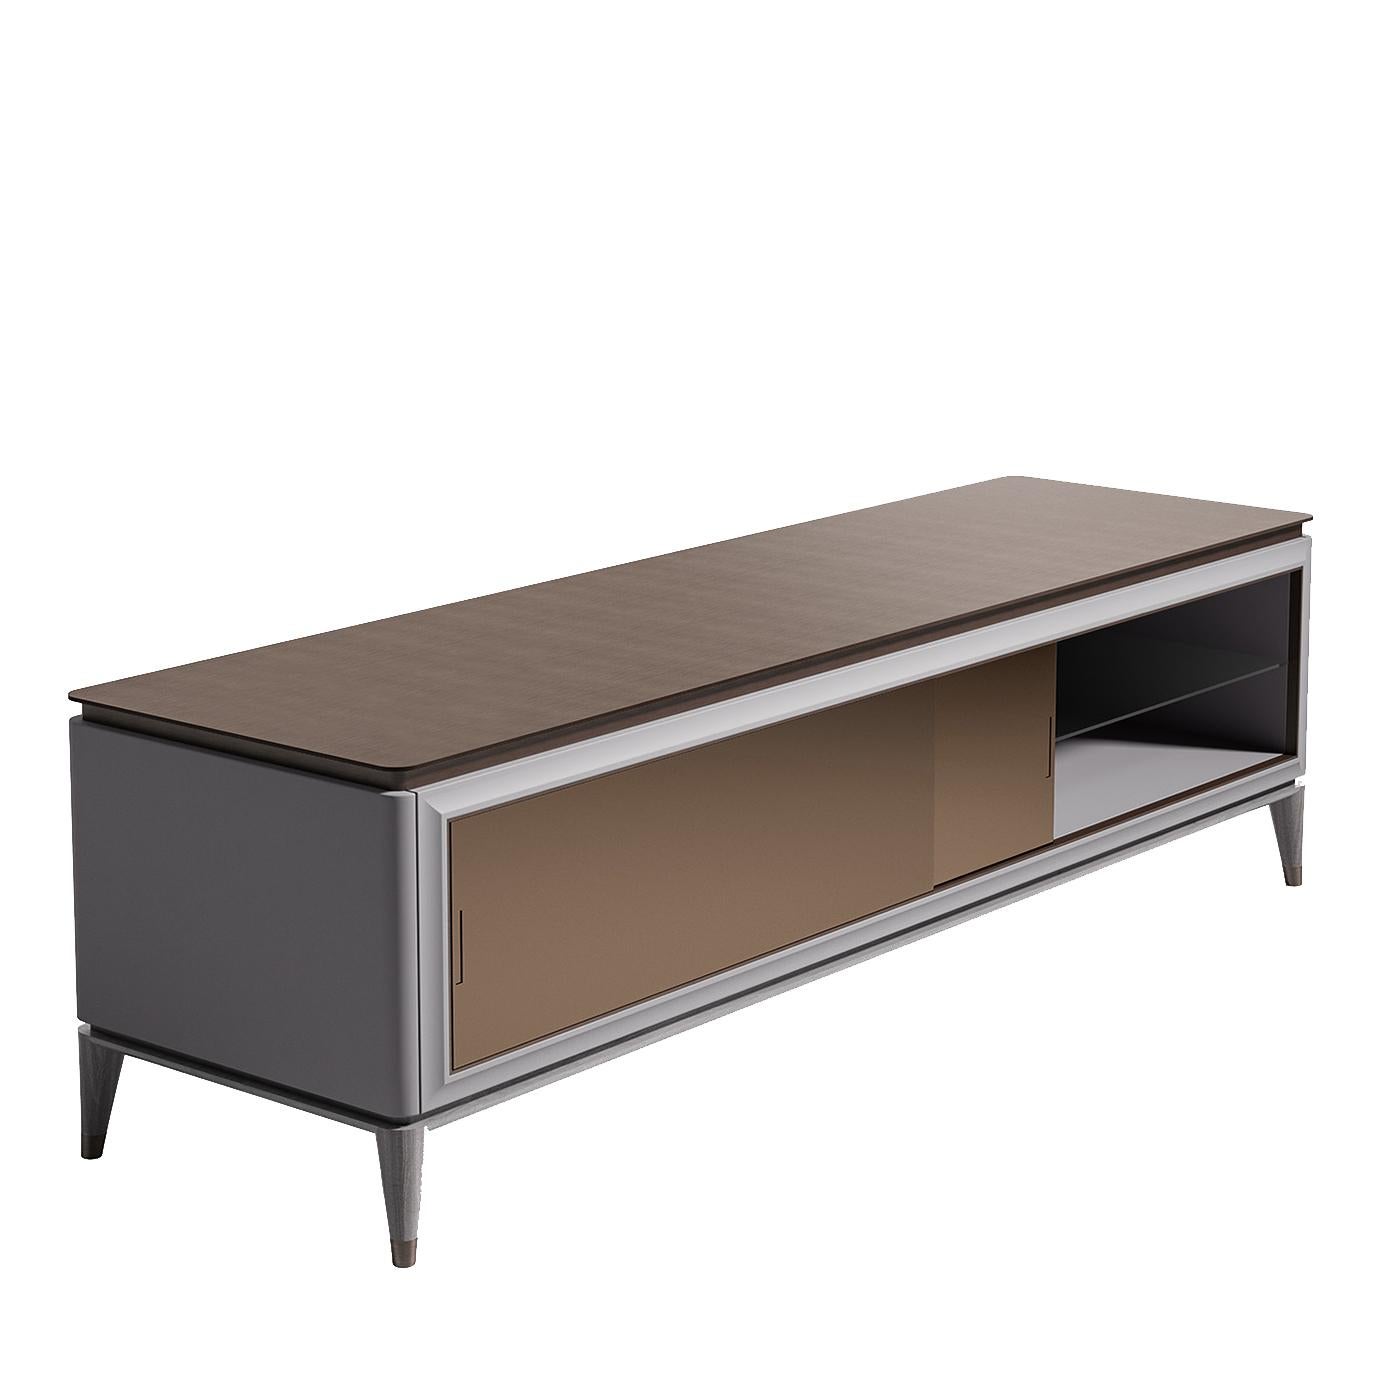 Reminiscent of Bauhaus furniture, the simple lines and bold forms of this polished cabinet will bring a sophisticated accent to a modern living room. The long and low rectangular cabinet is made of wood with a matte gray finish and has two sliding